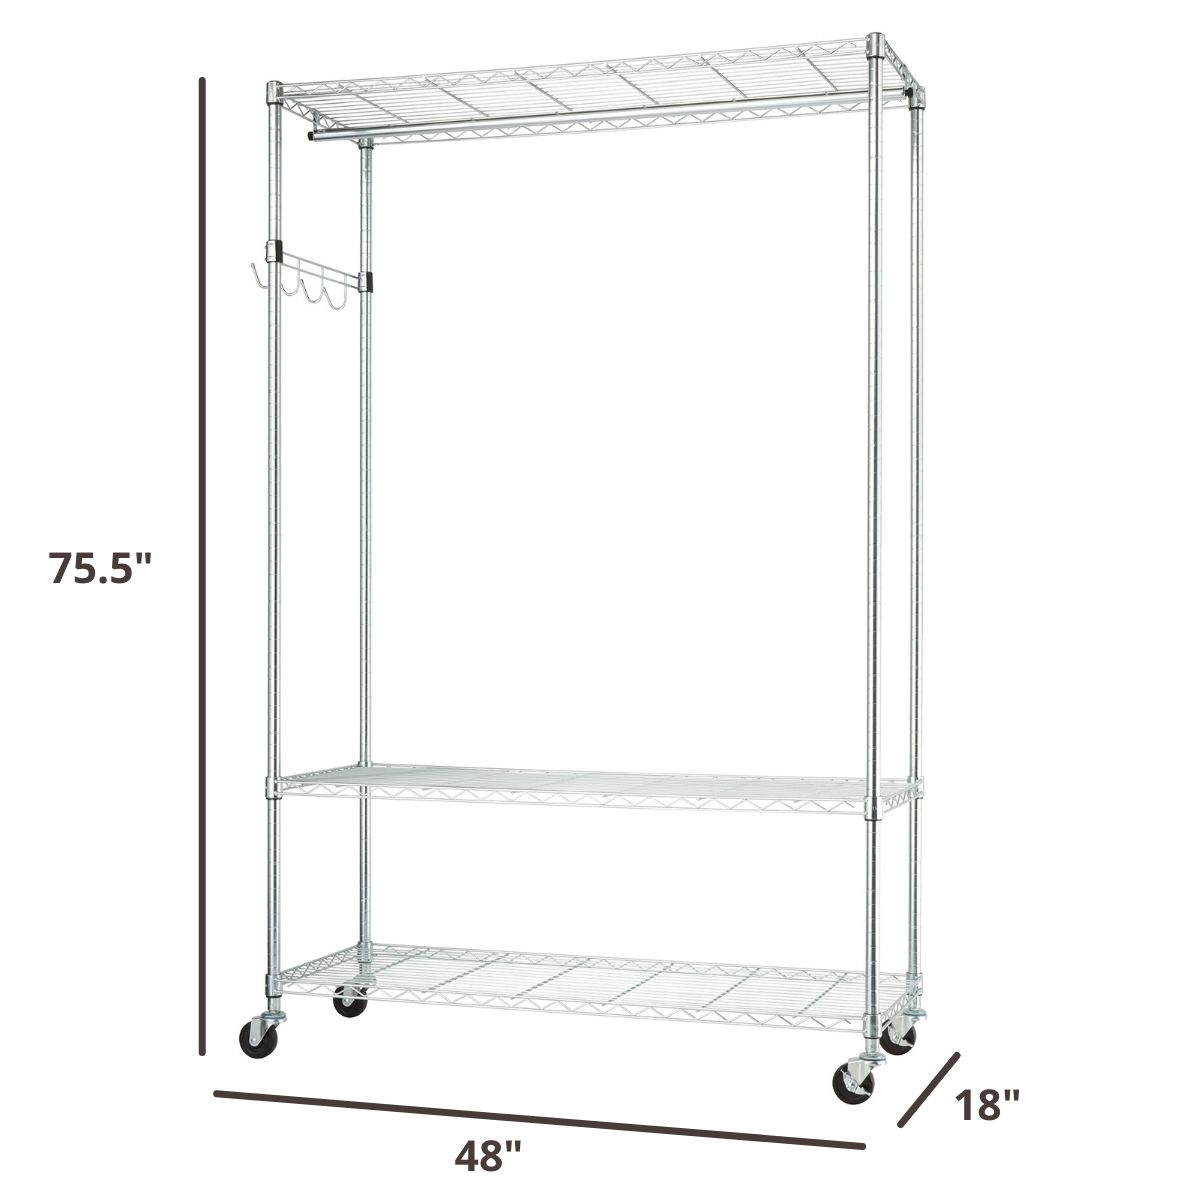 75.7 inches tall by 48 inches wide by 18 inches deep freestanding garment rack